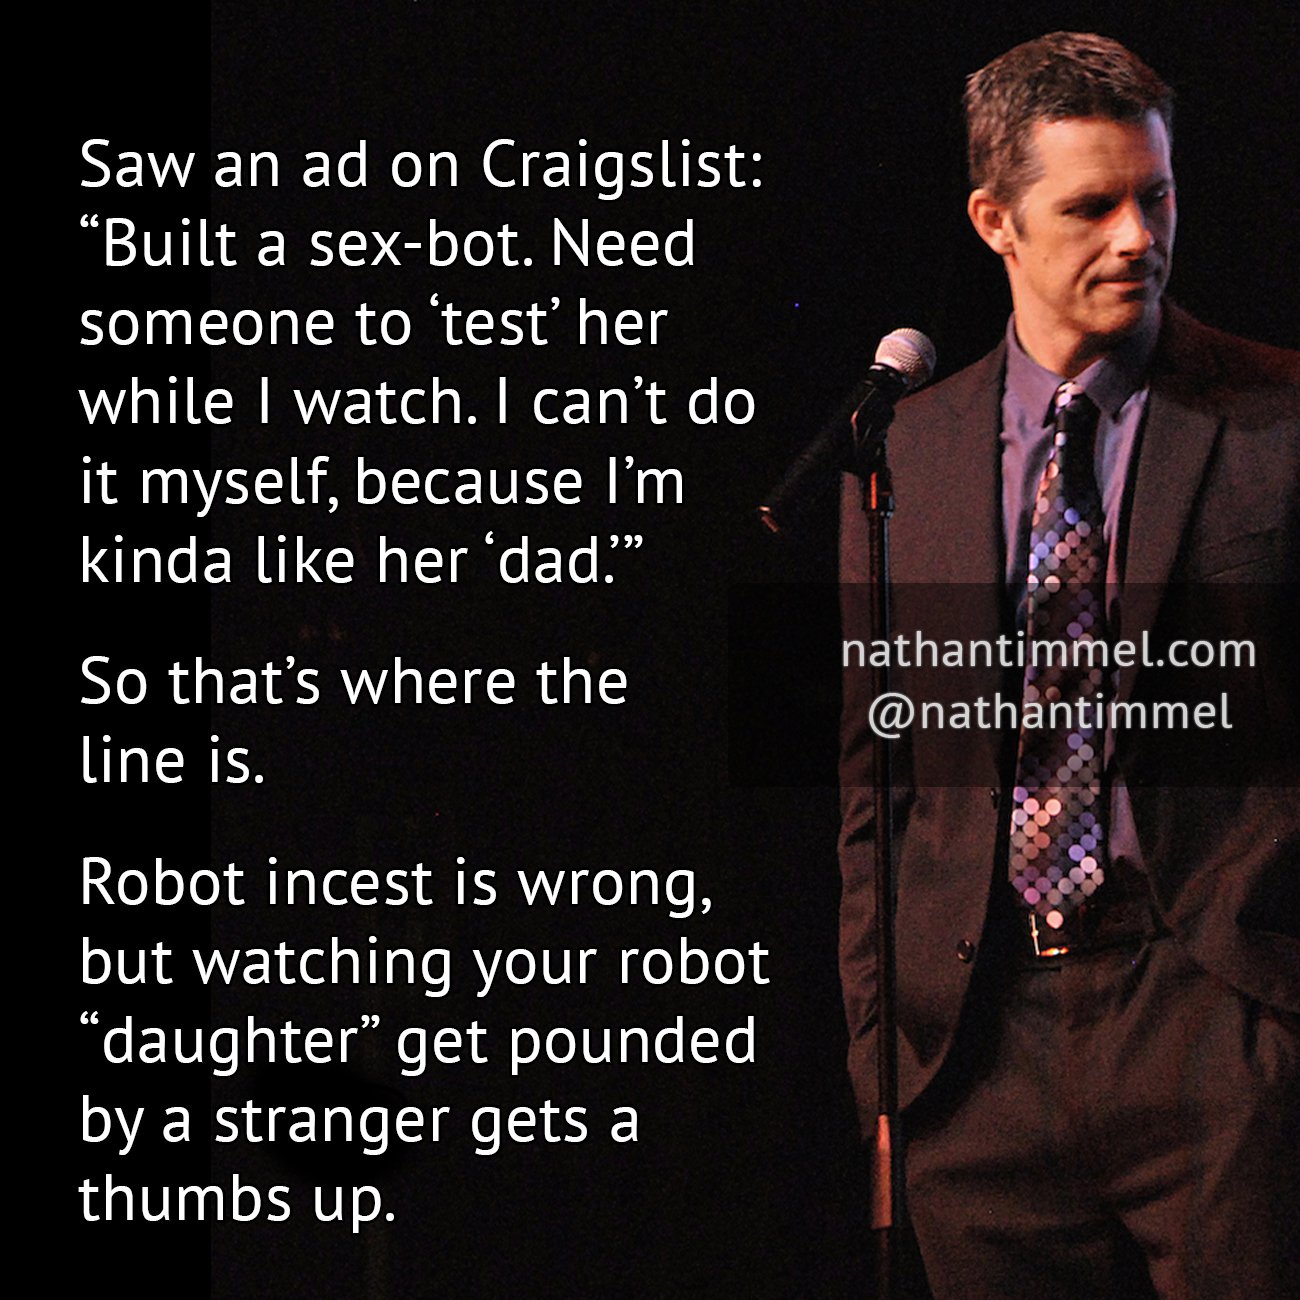 there are no stupid questions only stupid answers - Saw an ad on Craigslist Built a sexbot. Need someone to test her while I watch. I can't do it myself, because I'm kinda her dad? So that's where the line is. nathantimmel.com Robot incest is wrong, but w